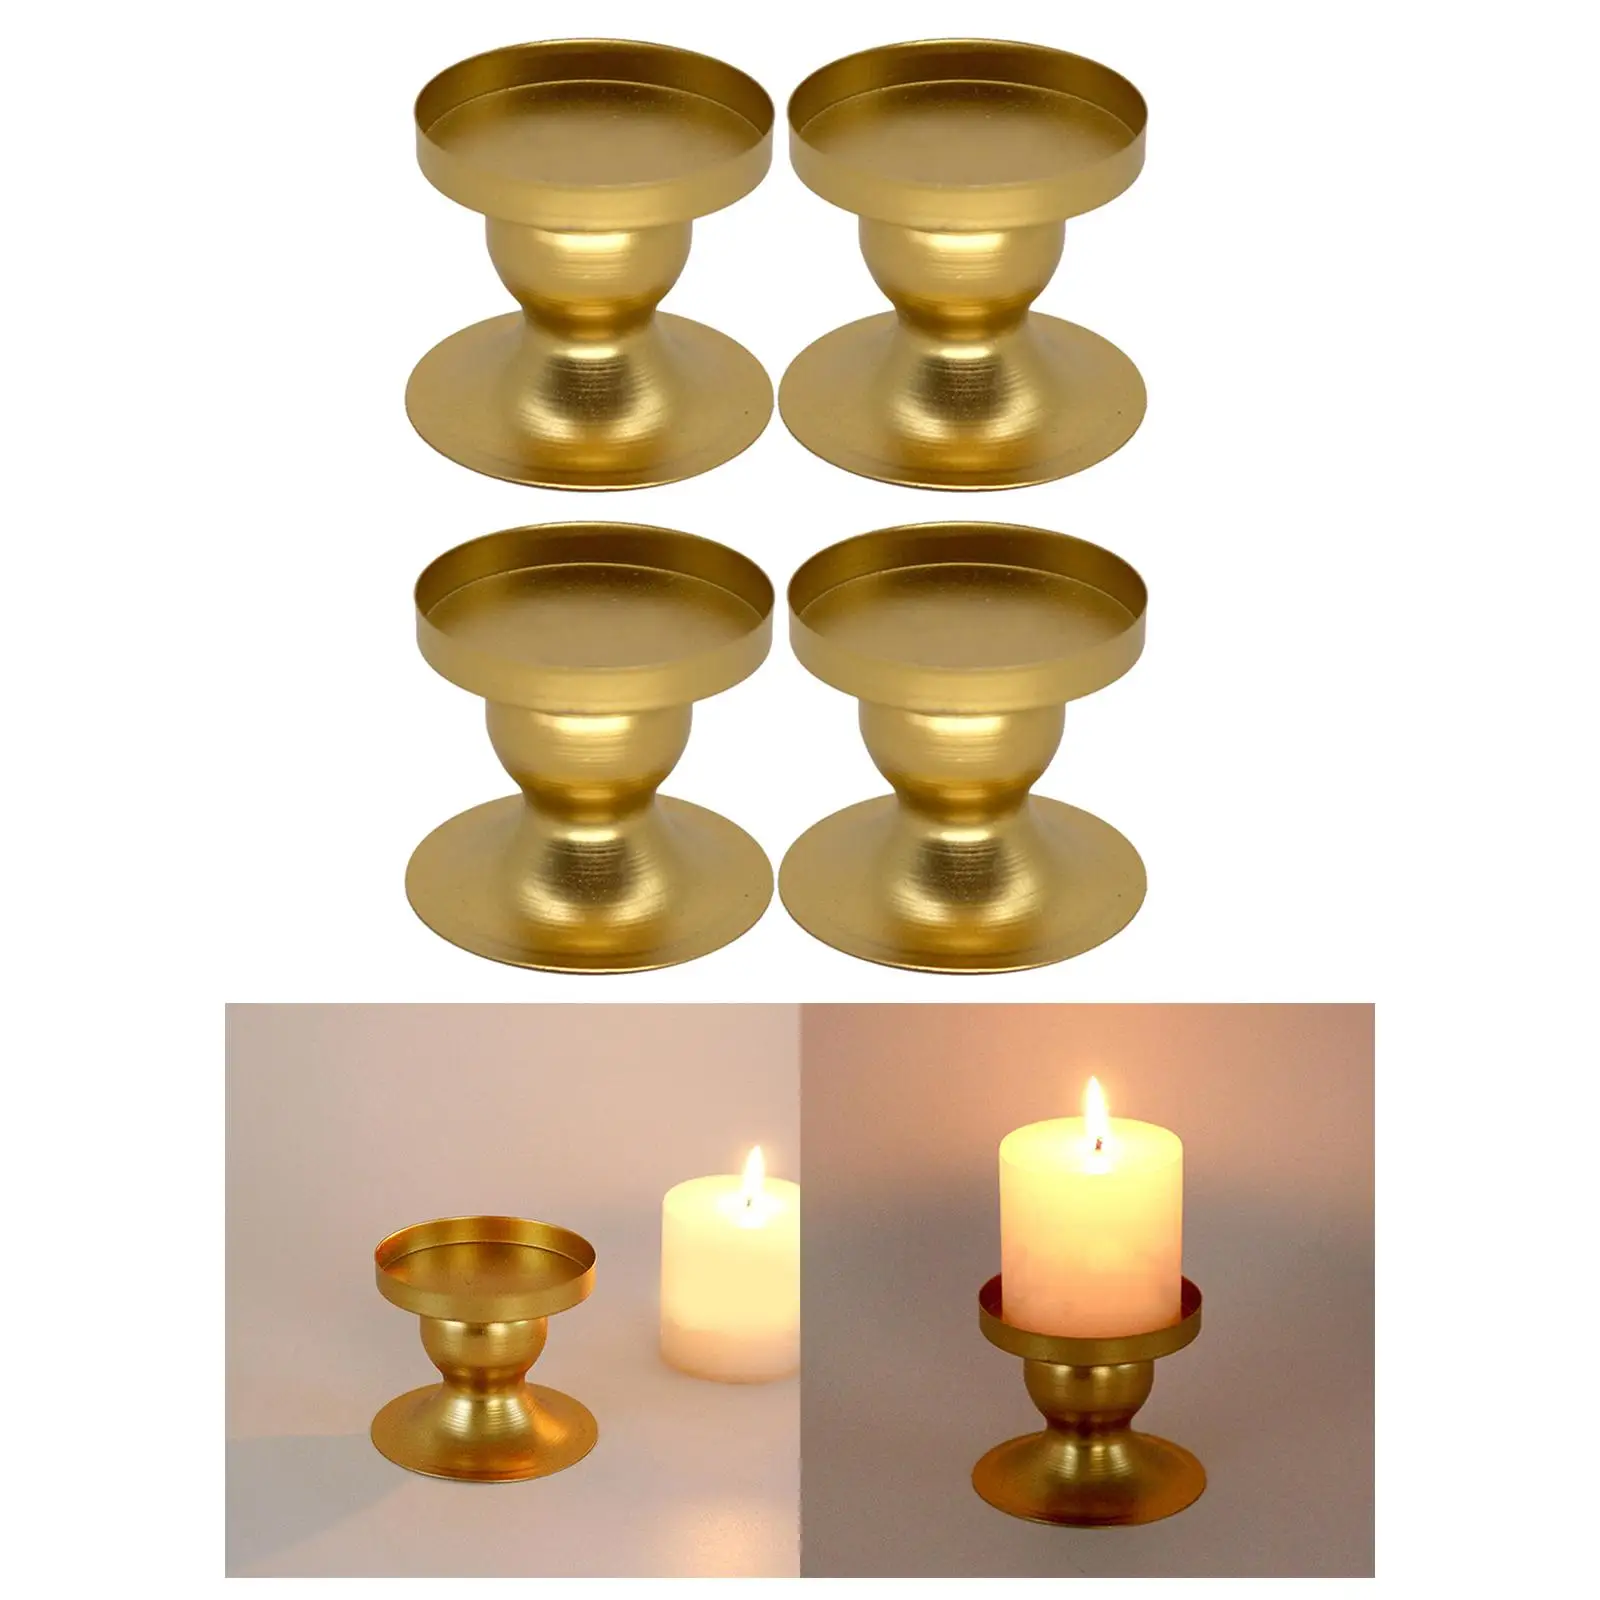 4 Pieces Candle Holder Pillar Candle Tray 2.4inch Tall for Housewarming Gift